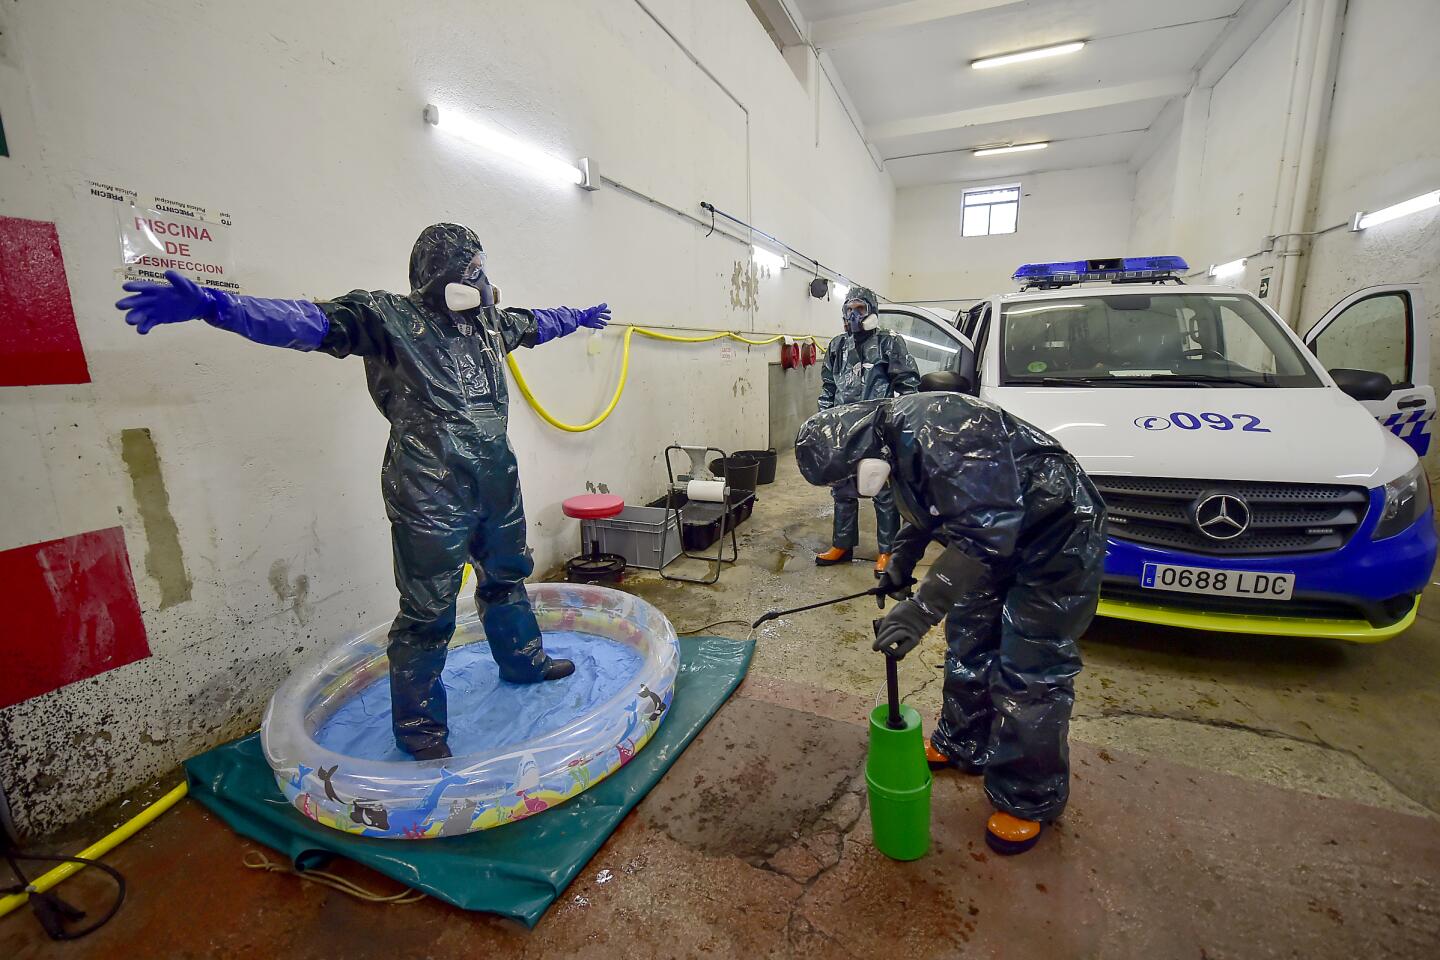 Spain: Volunteer workers of Search and Rescue (SAR) with special equipment disinfect a volunteer after disinfecting a police car at a local police station to prevent the spread of coronavirus in northern Spain.